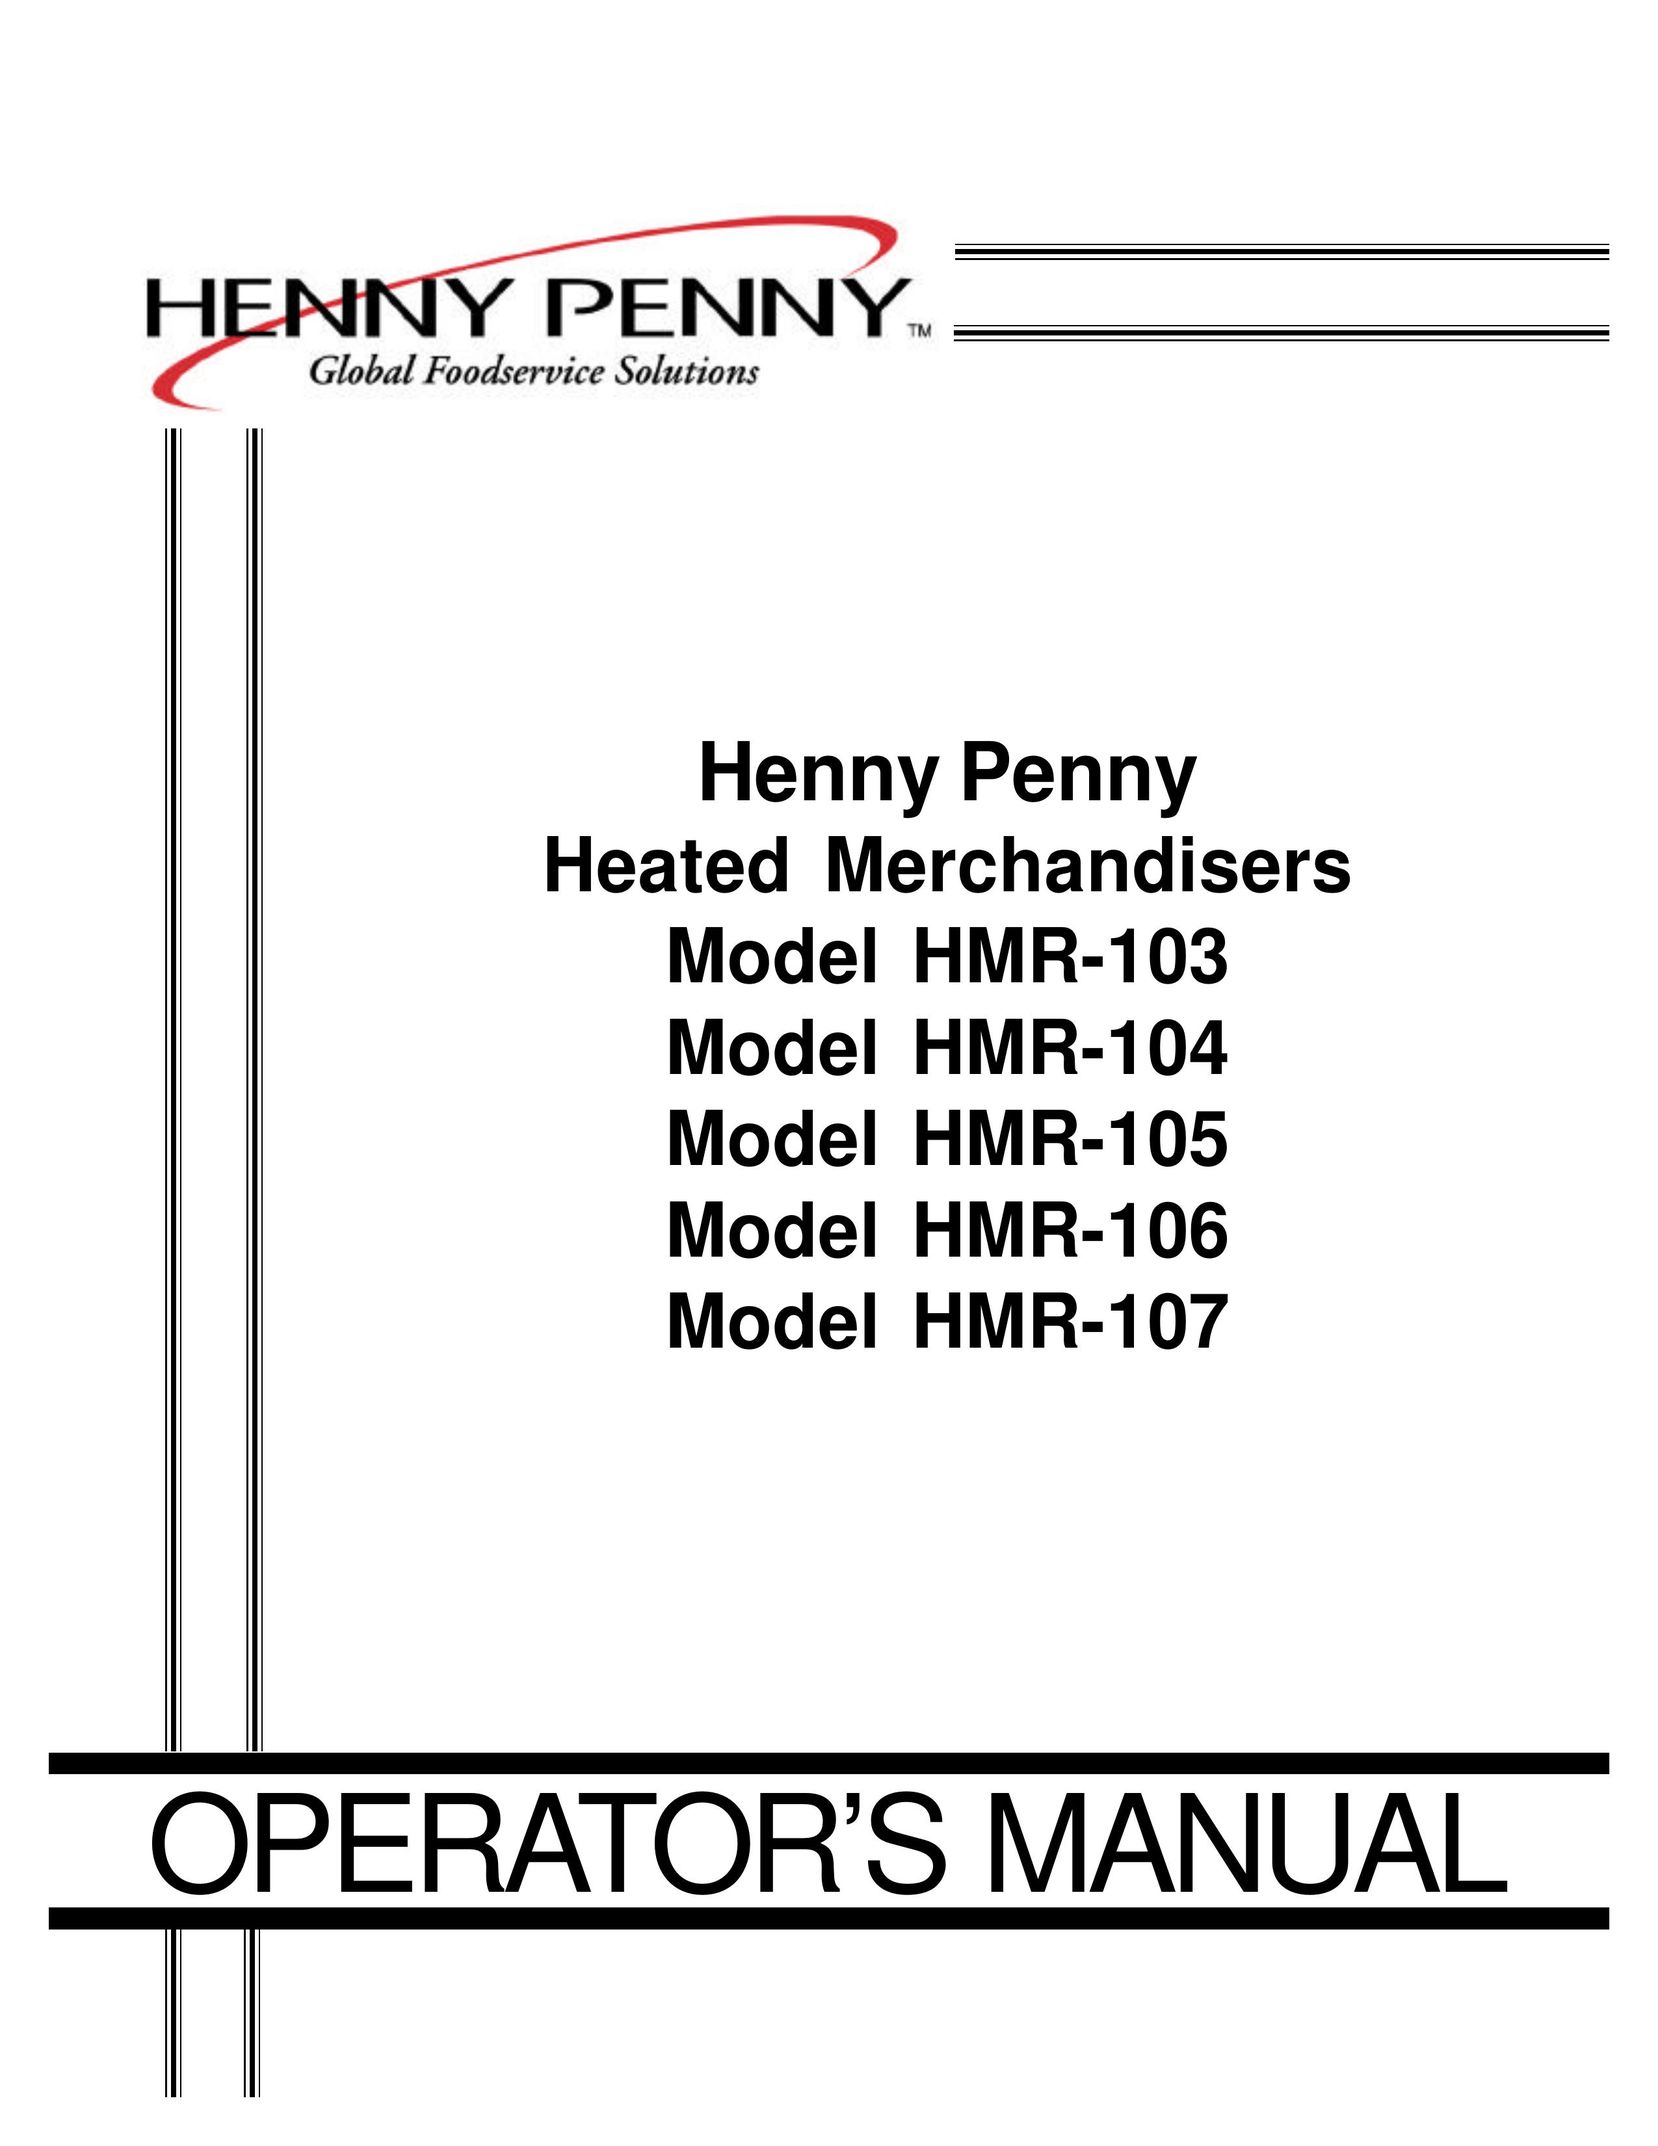 Henny Penny HMR-106 Electric Heater User Manual